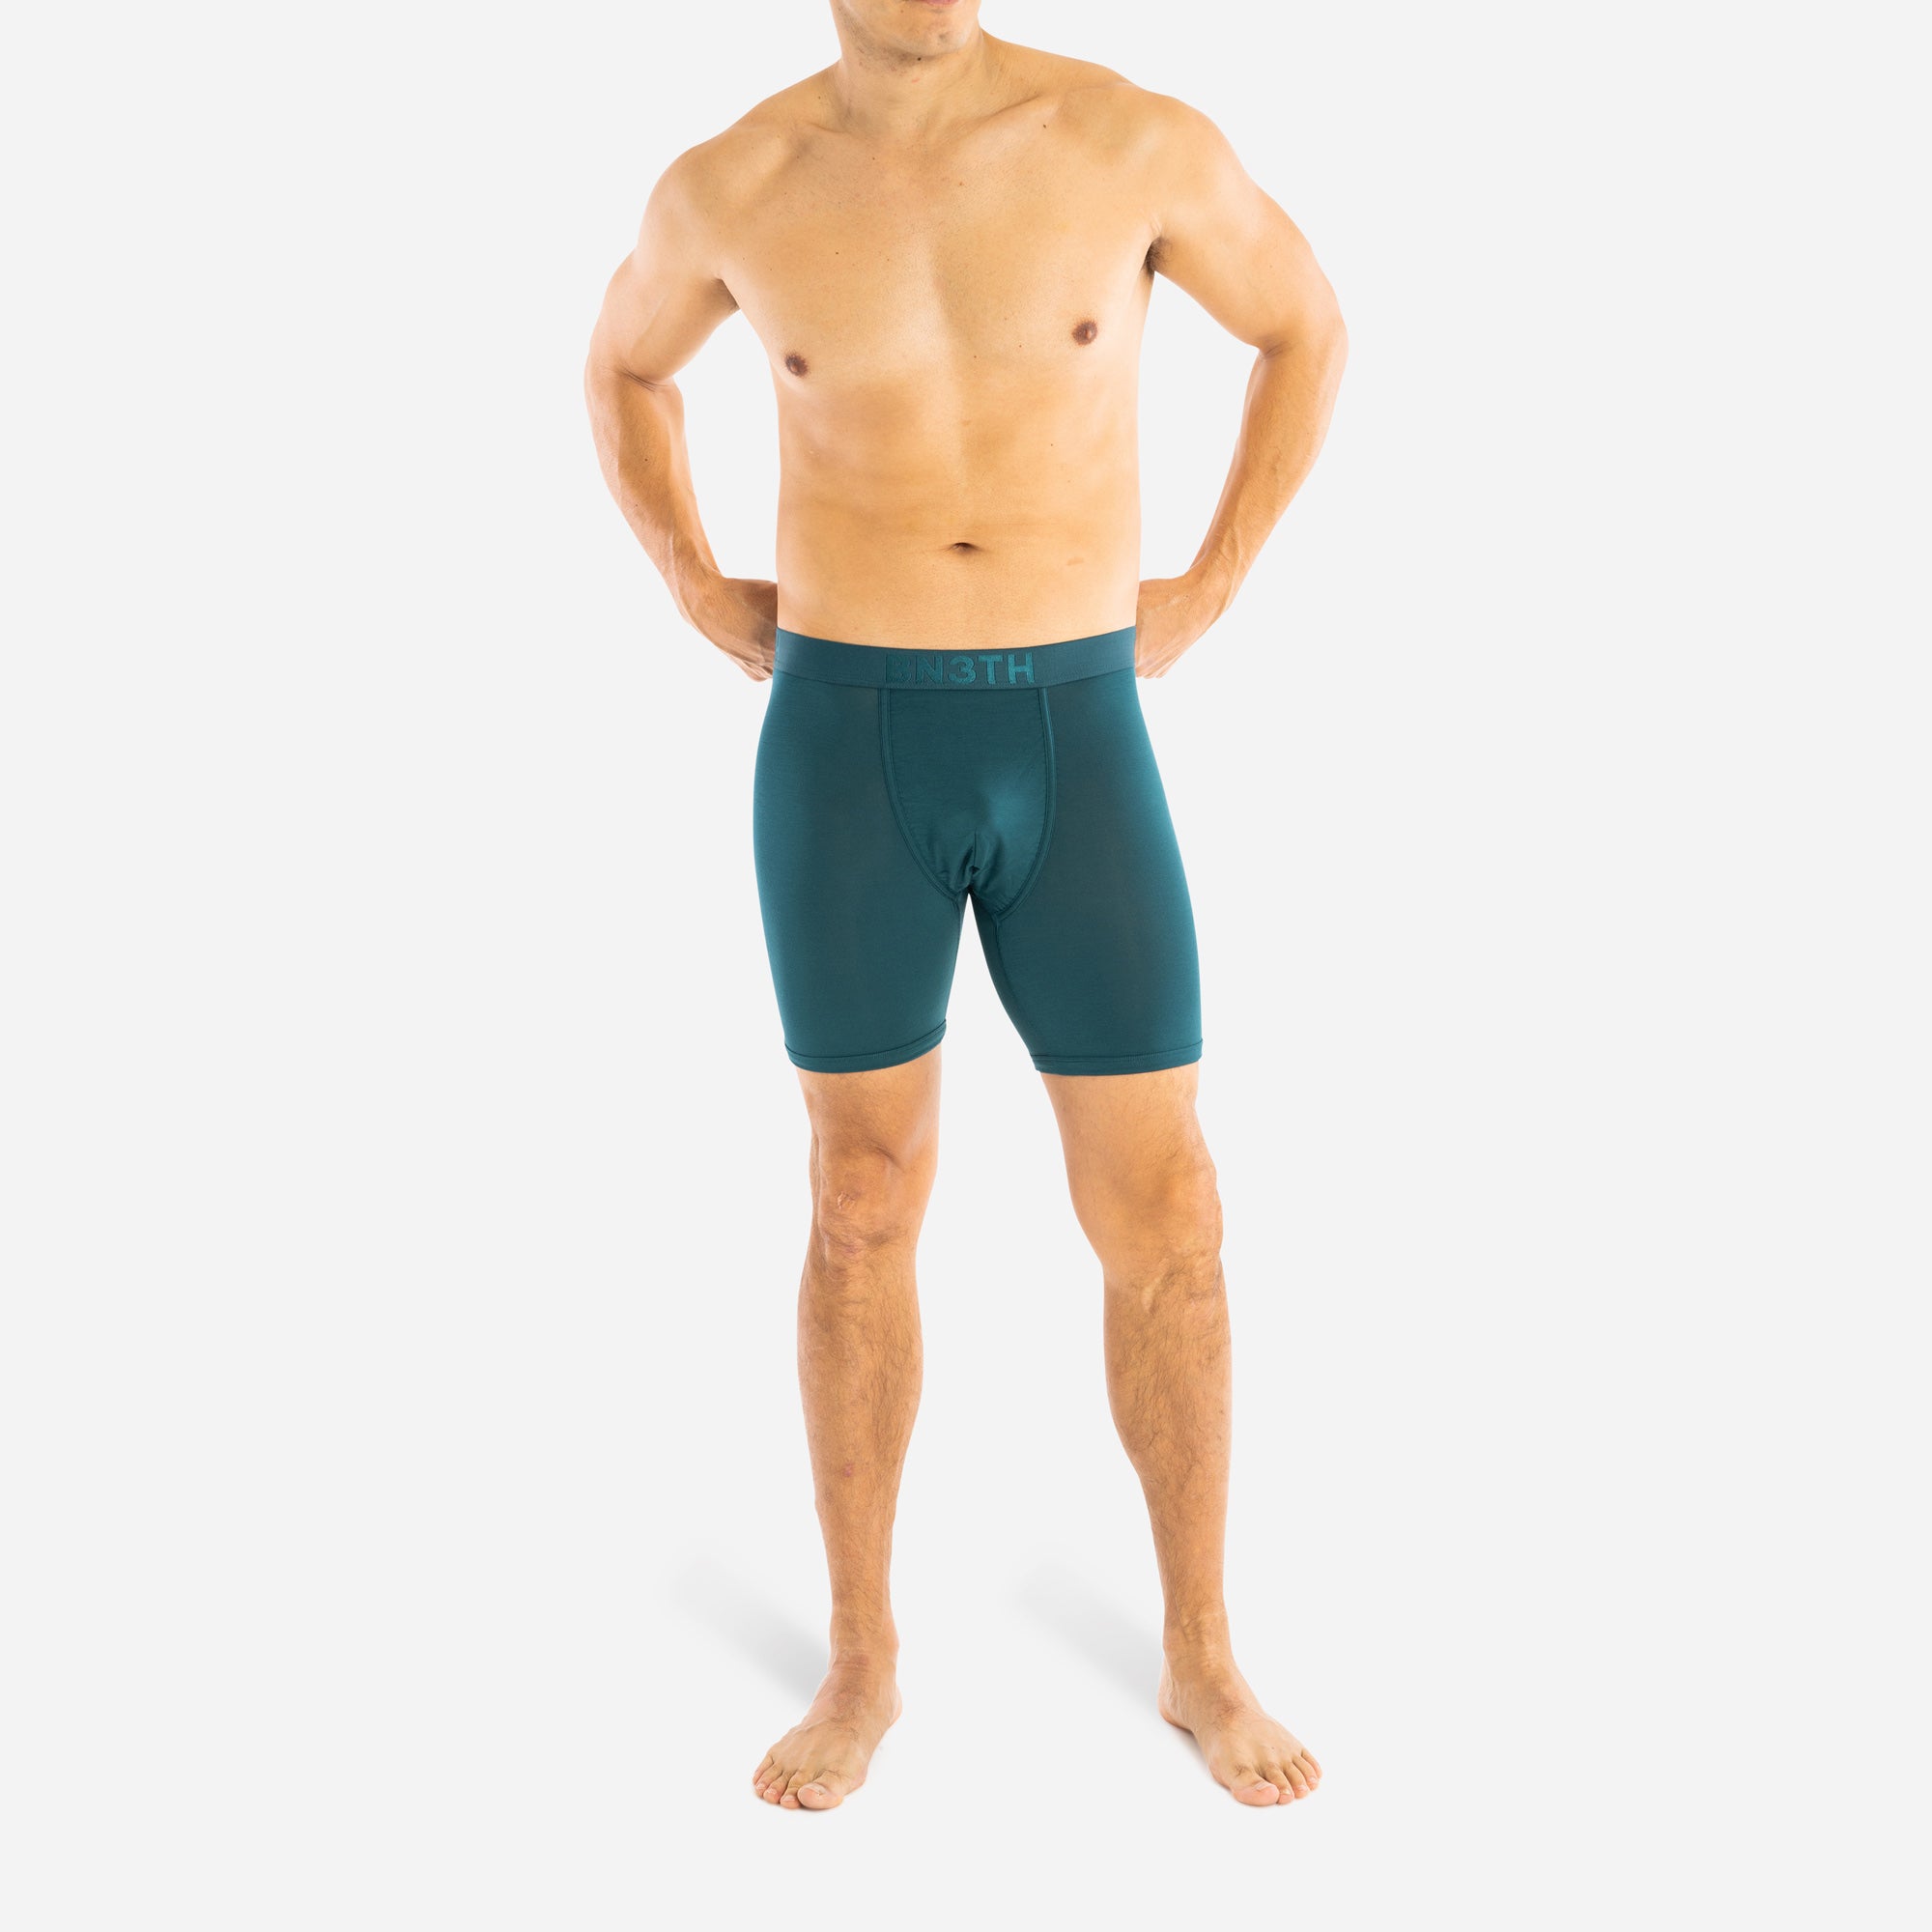 CLASSIC BOXER BRIEF: PINE/CAMO GREEN 2 PACK